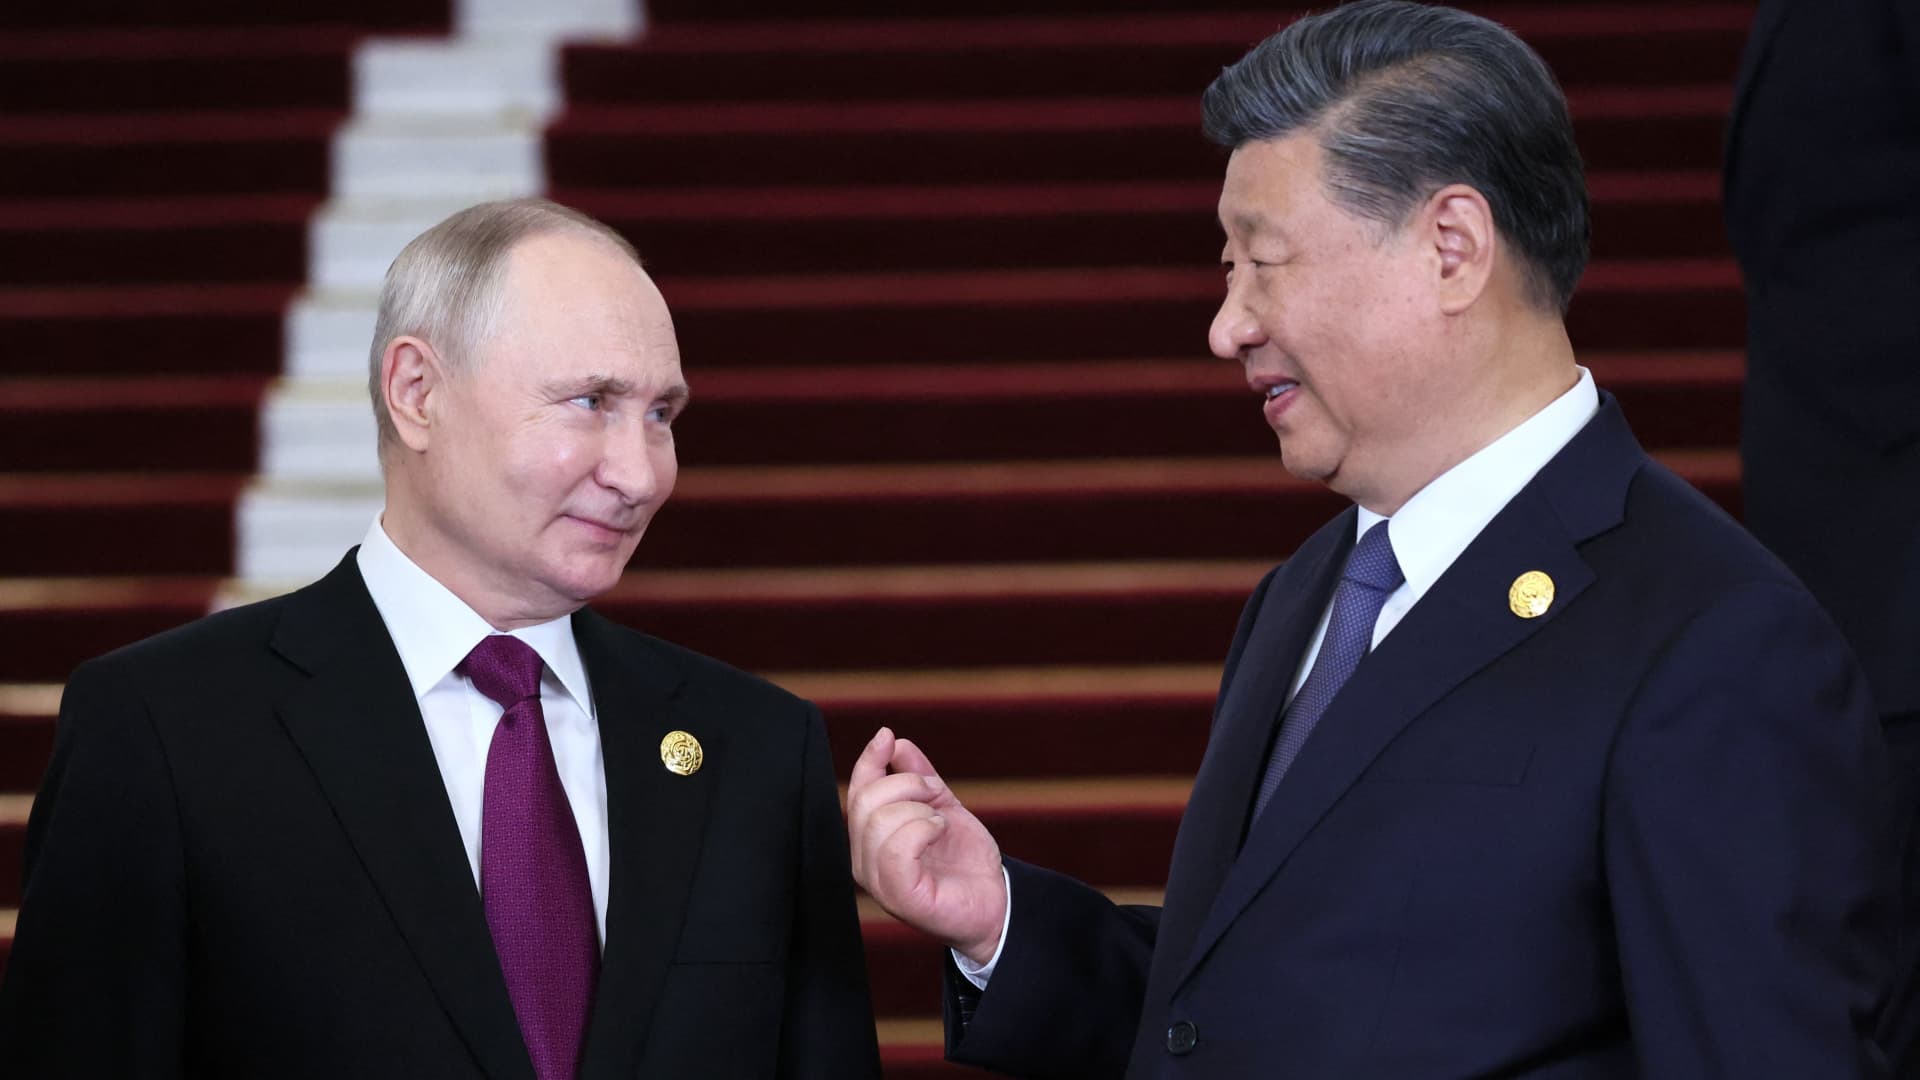 A pool photograph distributed by Russian state owned agency Sputnik showing Russia's President Vladimir Putin and Chinese President Xi Jinping during a welcoming ceremony at the Third Belt and Road Forum in Beijing on October 17, 2023.